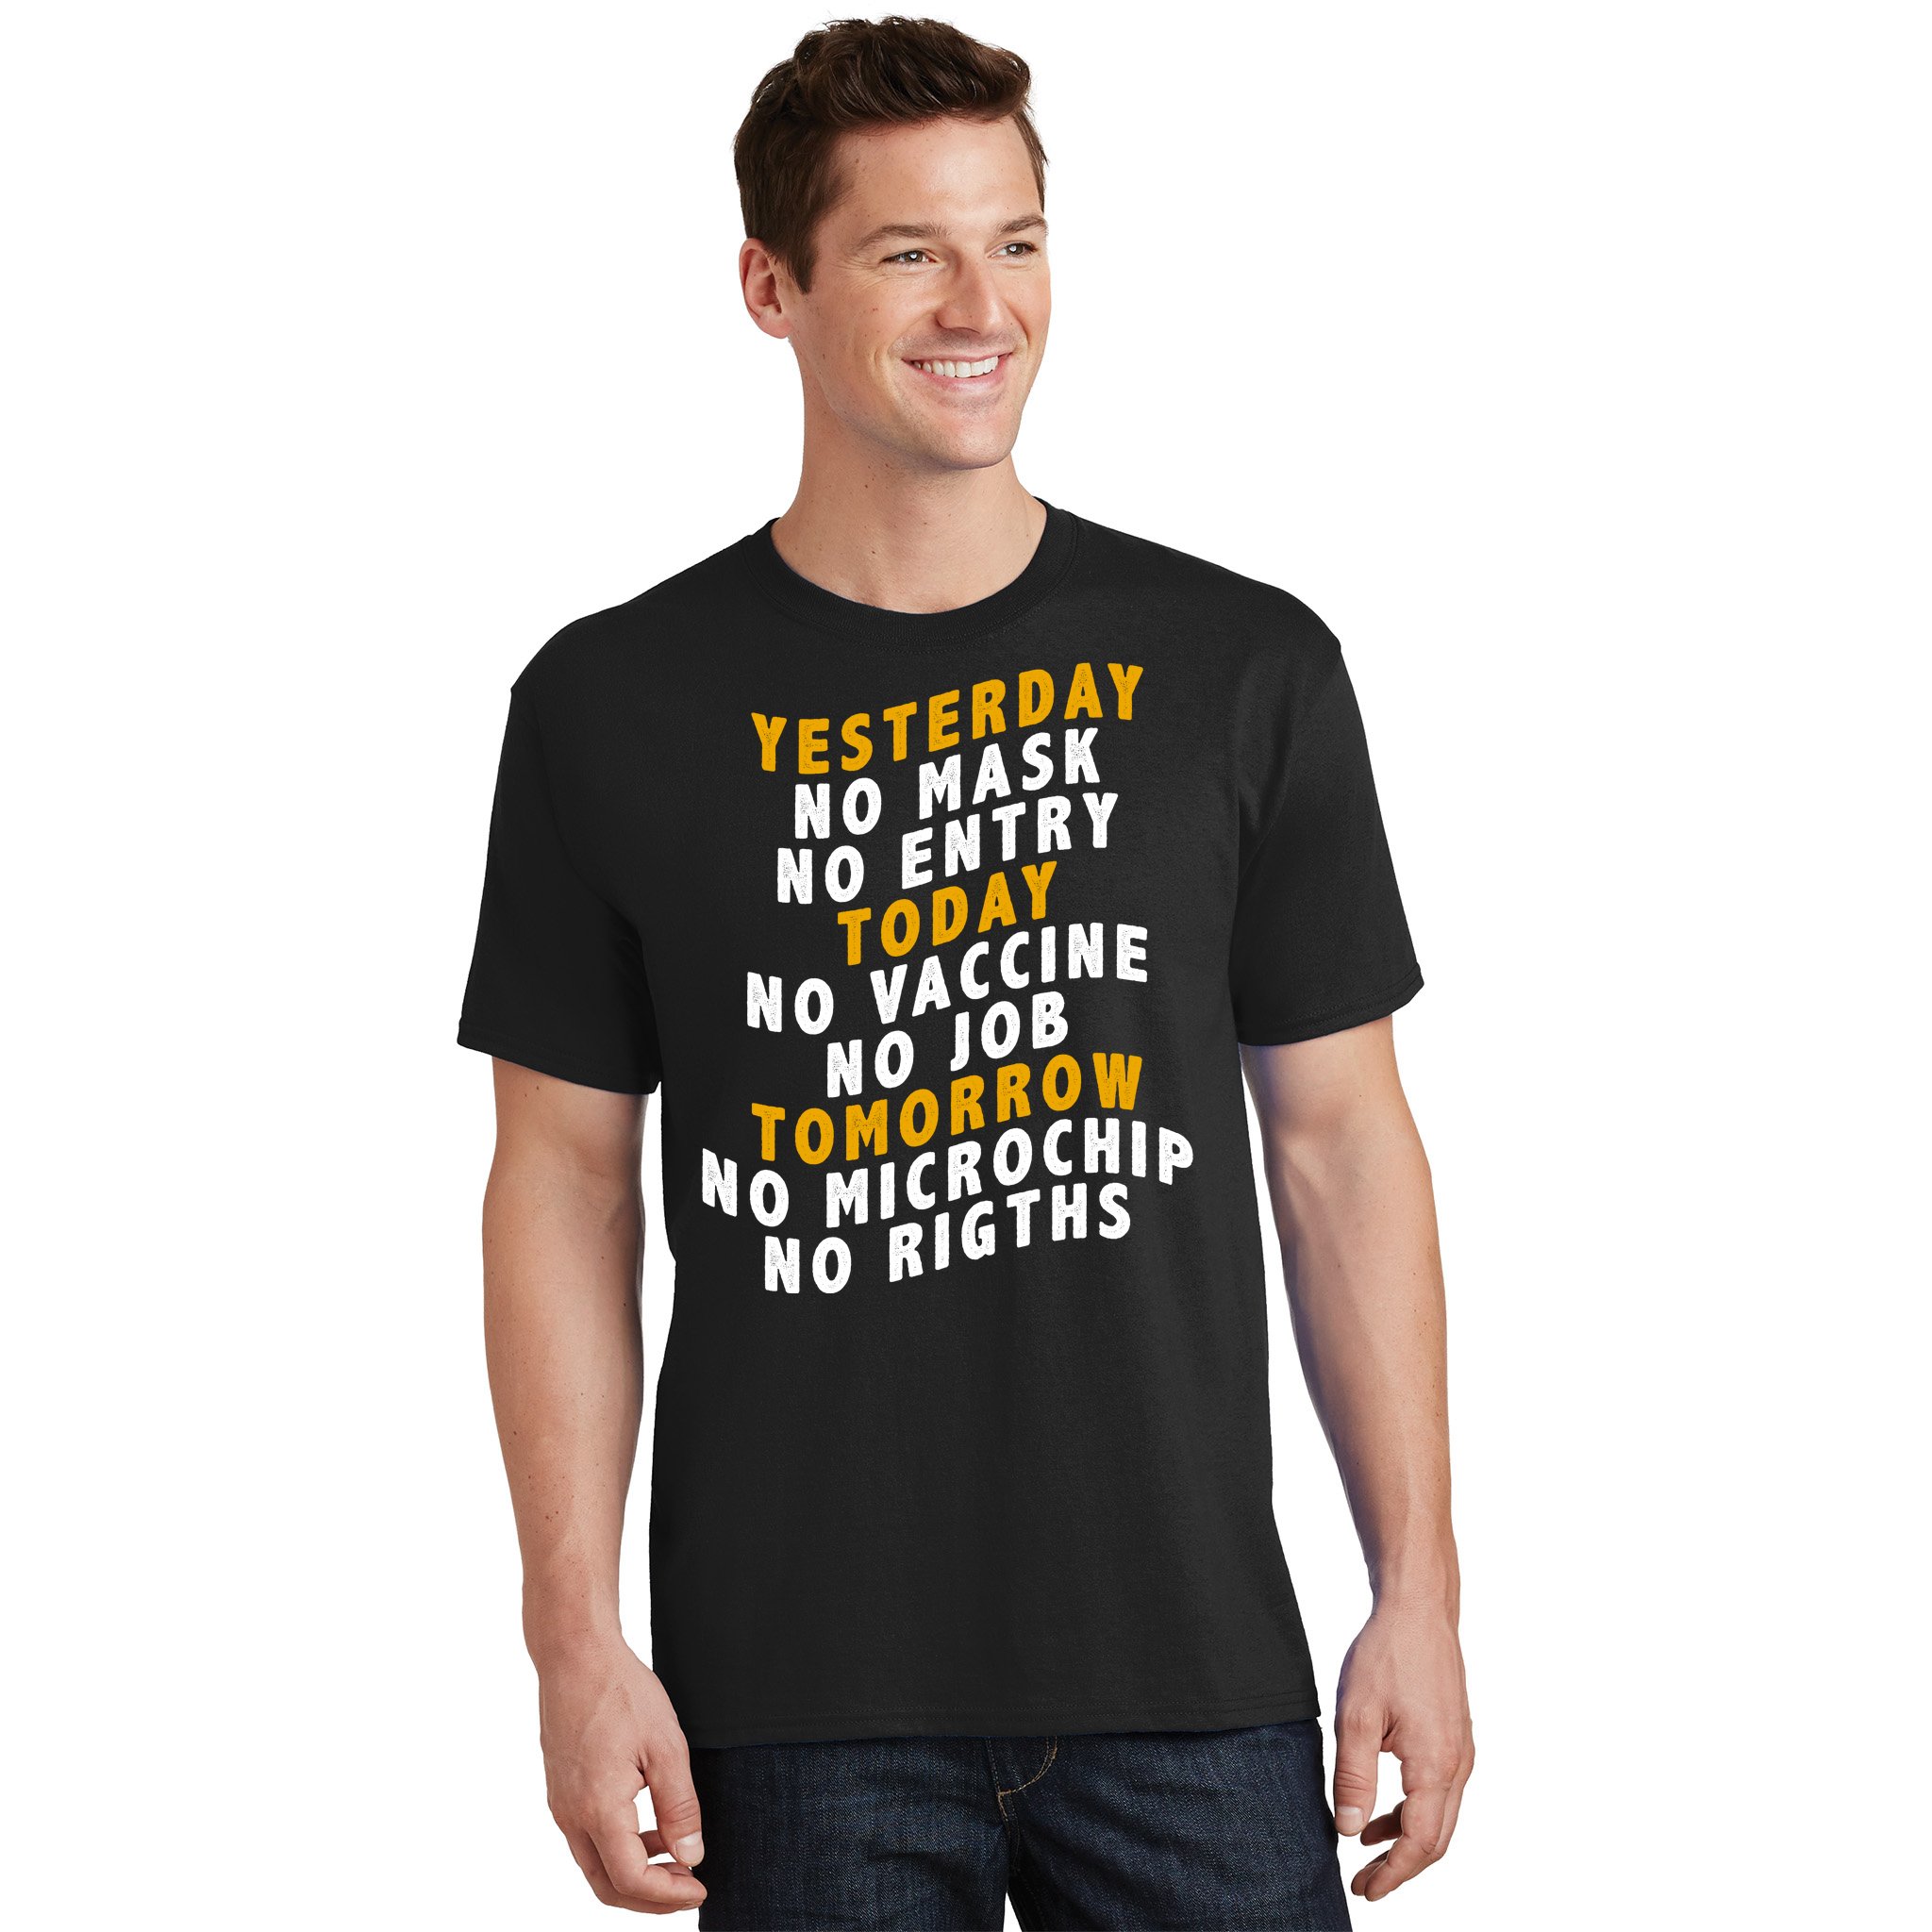 Vaccinated but still odd funny graphic shirt no yolo sports party tee cotton shirt for all paranoids and vaccination medical humor funny